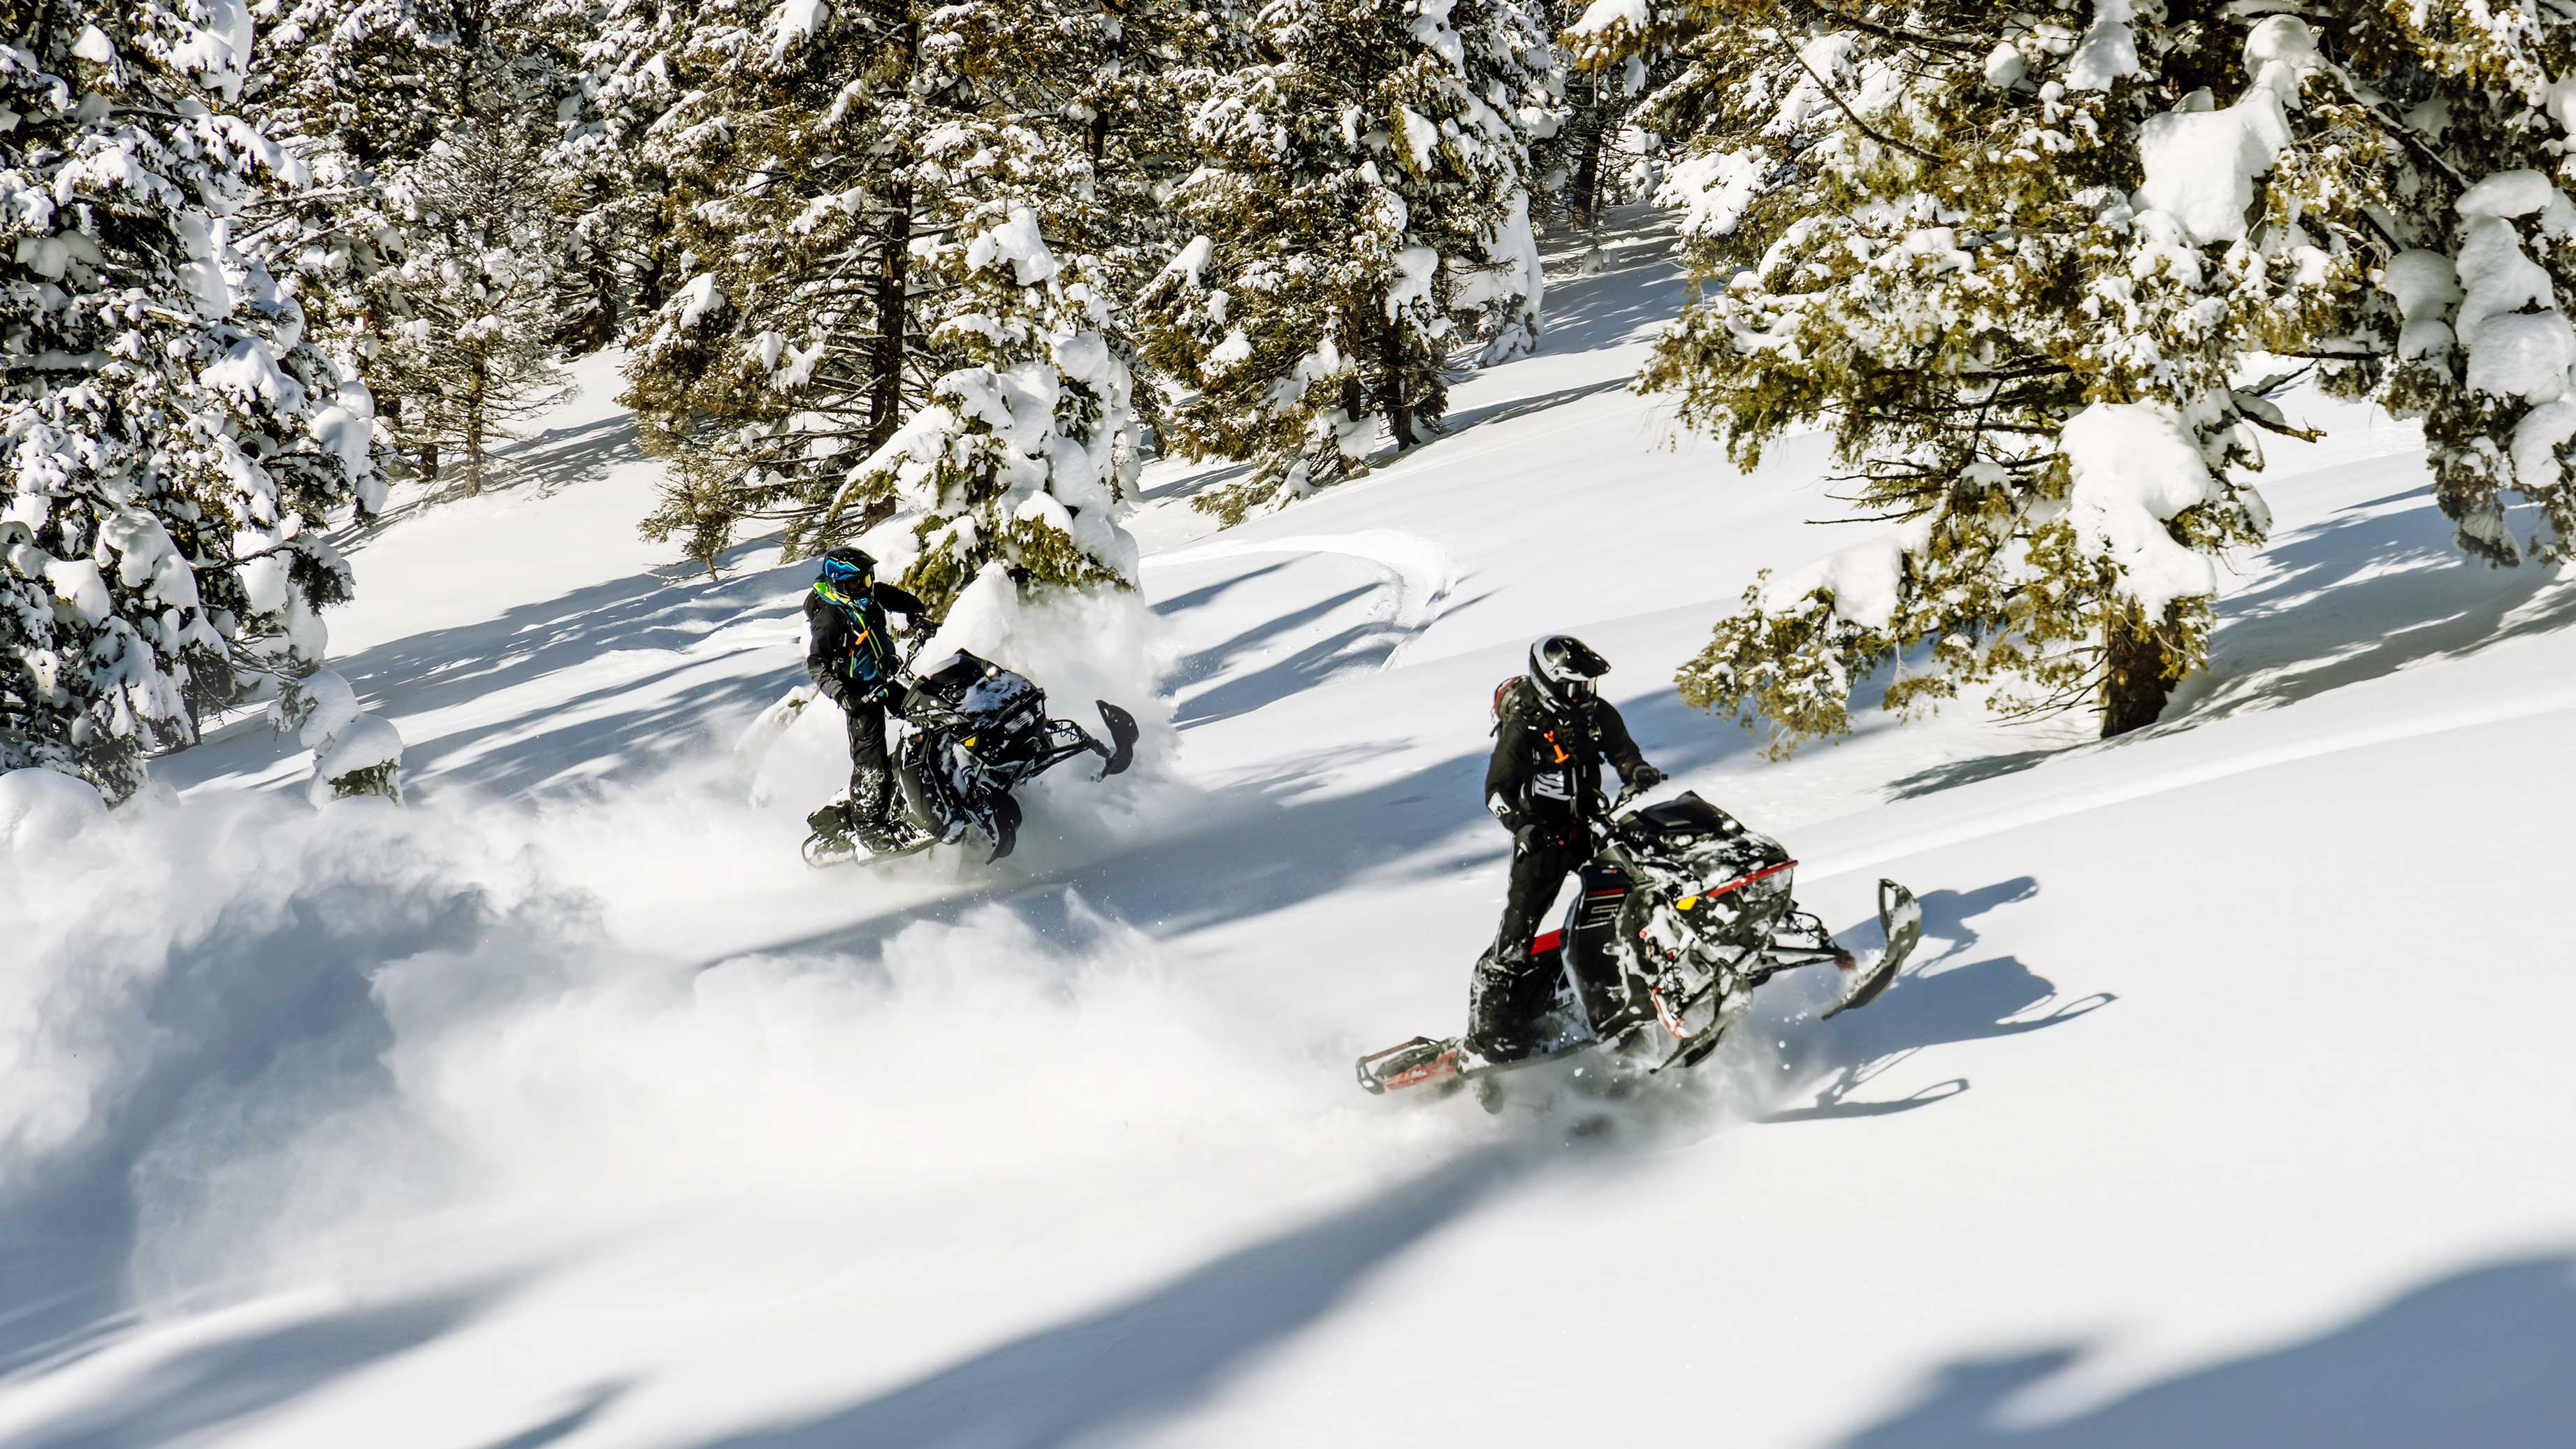 Two riders in deep snow with Ski-Doo snowmobiles